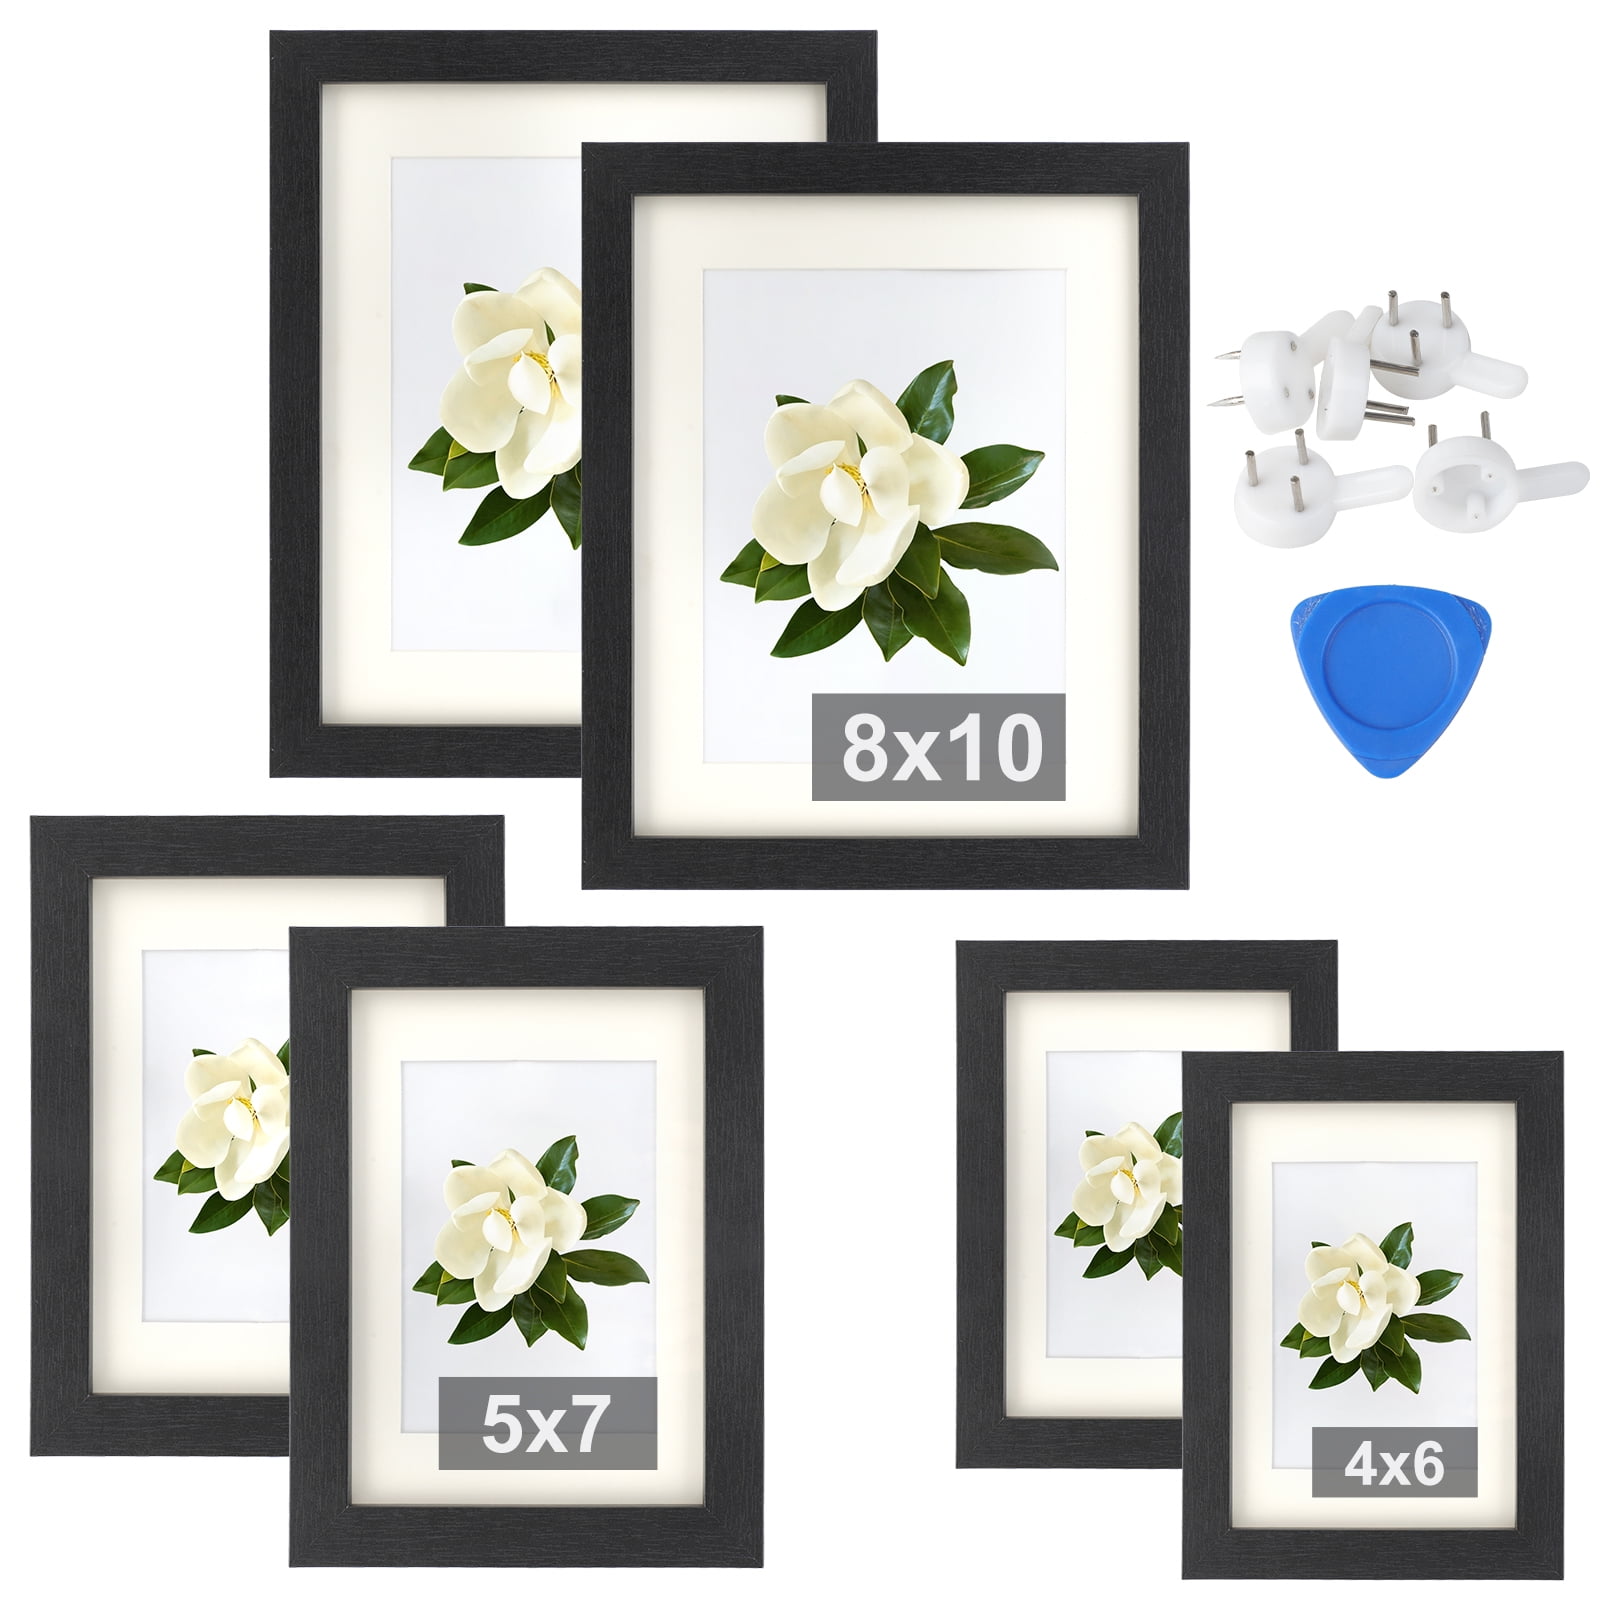 SOLD OUT ACCESS A4 WHITE HINGED PICTURE FRAME DISPLAY BOX PHOTO OPEN FRONT 